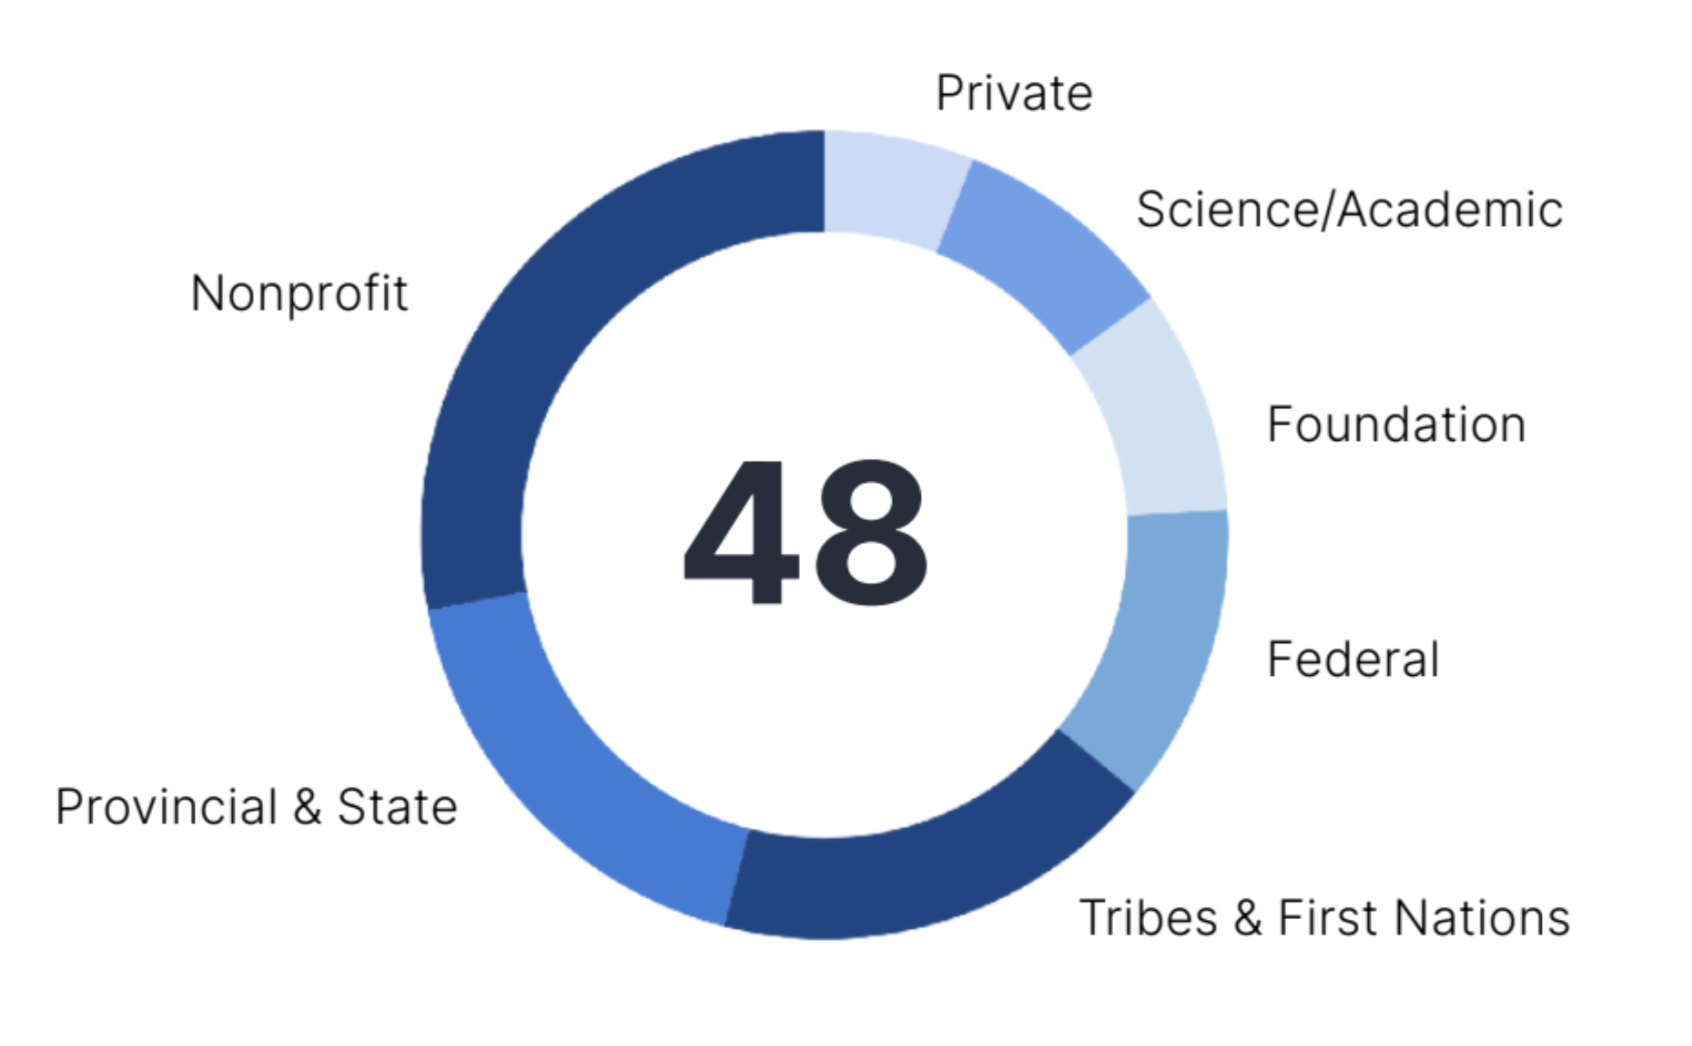 Pie chart showing breakdown of collaborators on the Blueprint. The pie chart shows that there are 48 different collaborators and organizations. Tribal and First Nations, nonprofits, and provincial and state partners are most represented among the collaborators. Science and academic partners, federal partners and funders follow, with private partners representing the smallest piece of the pie.